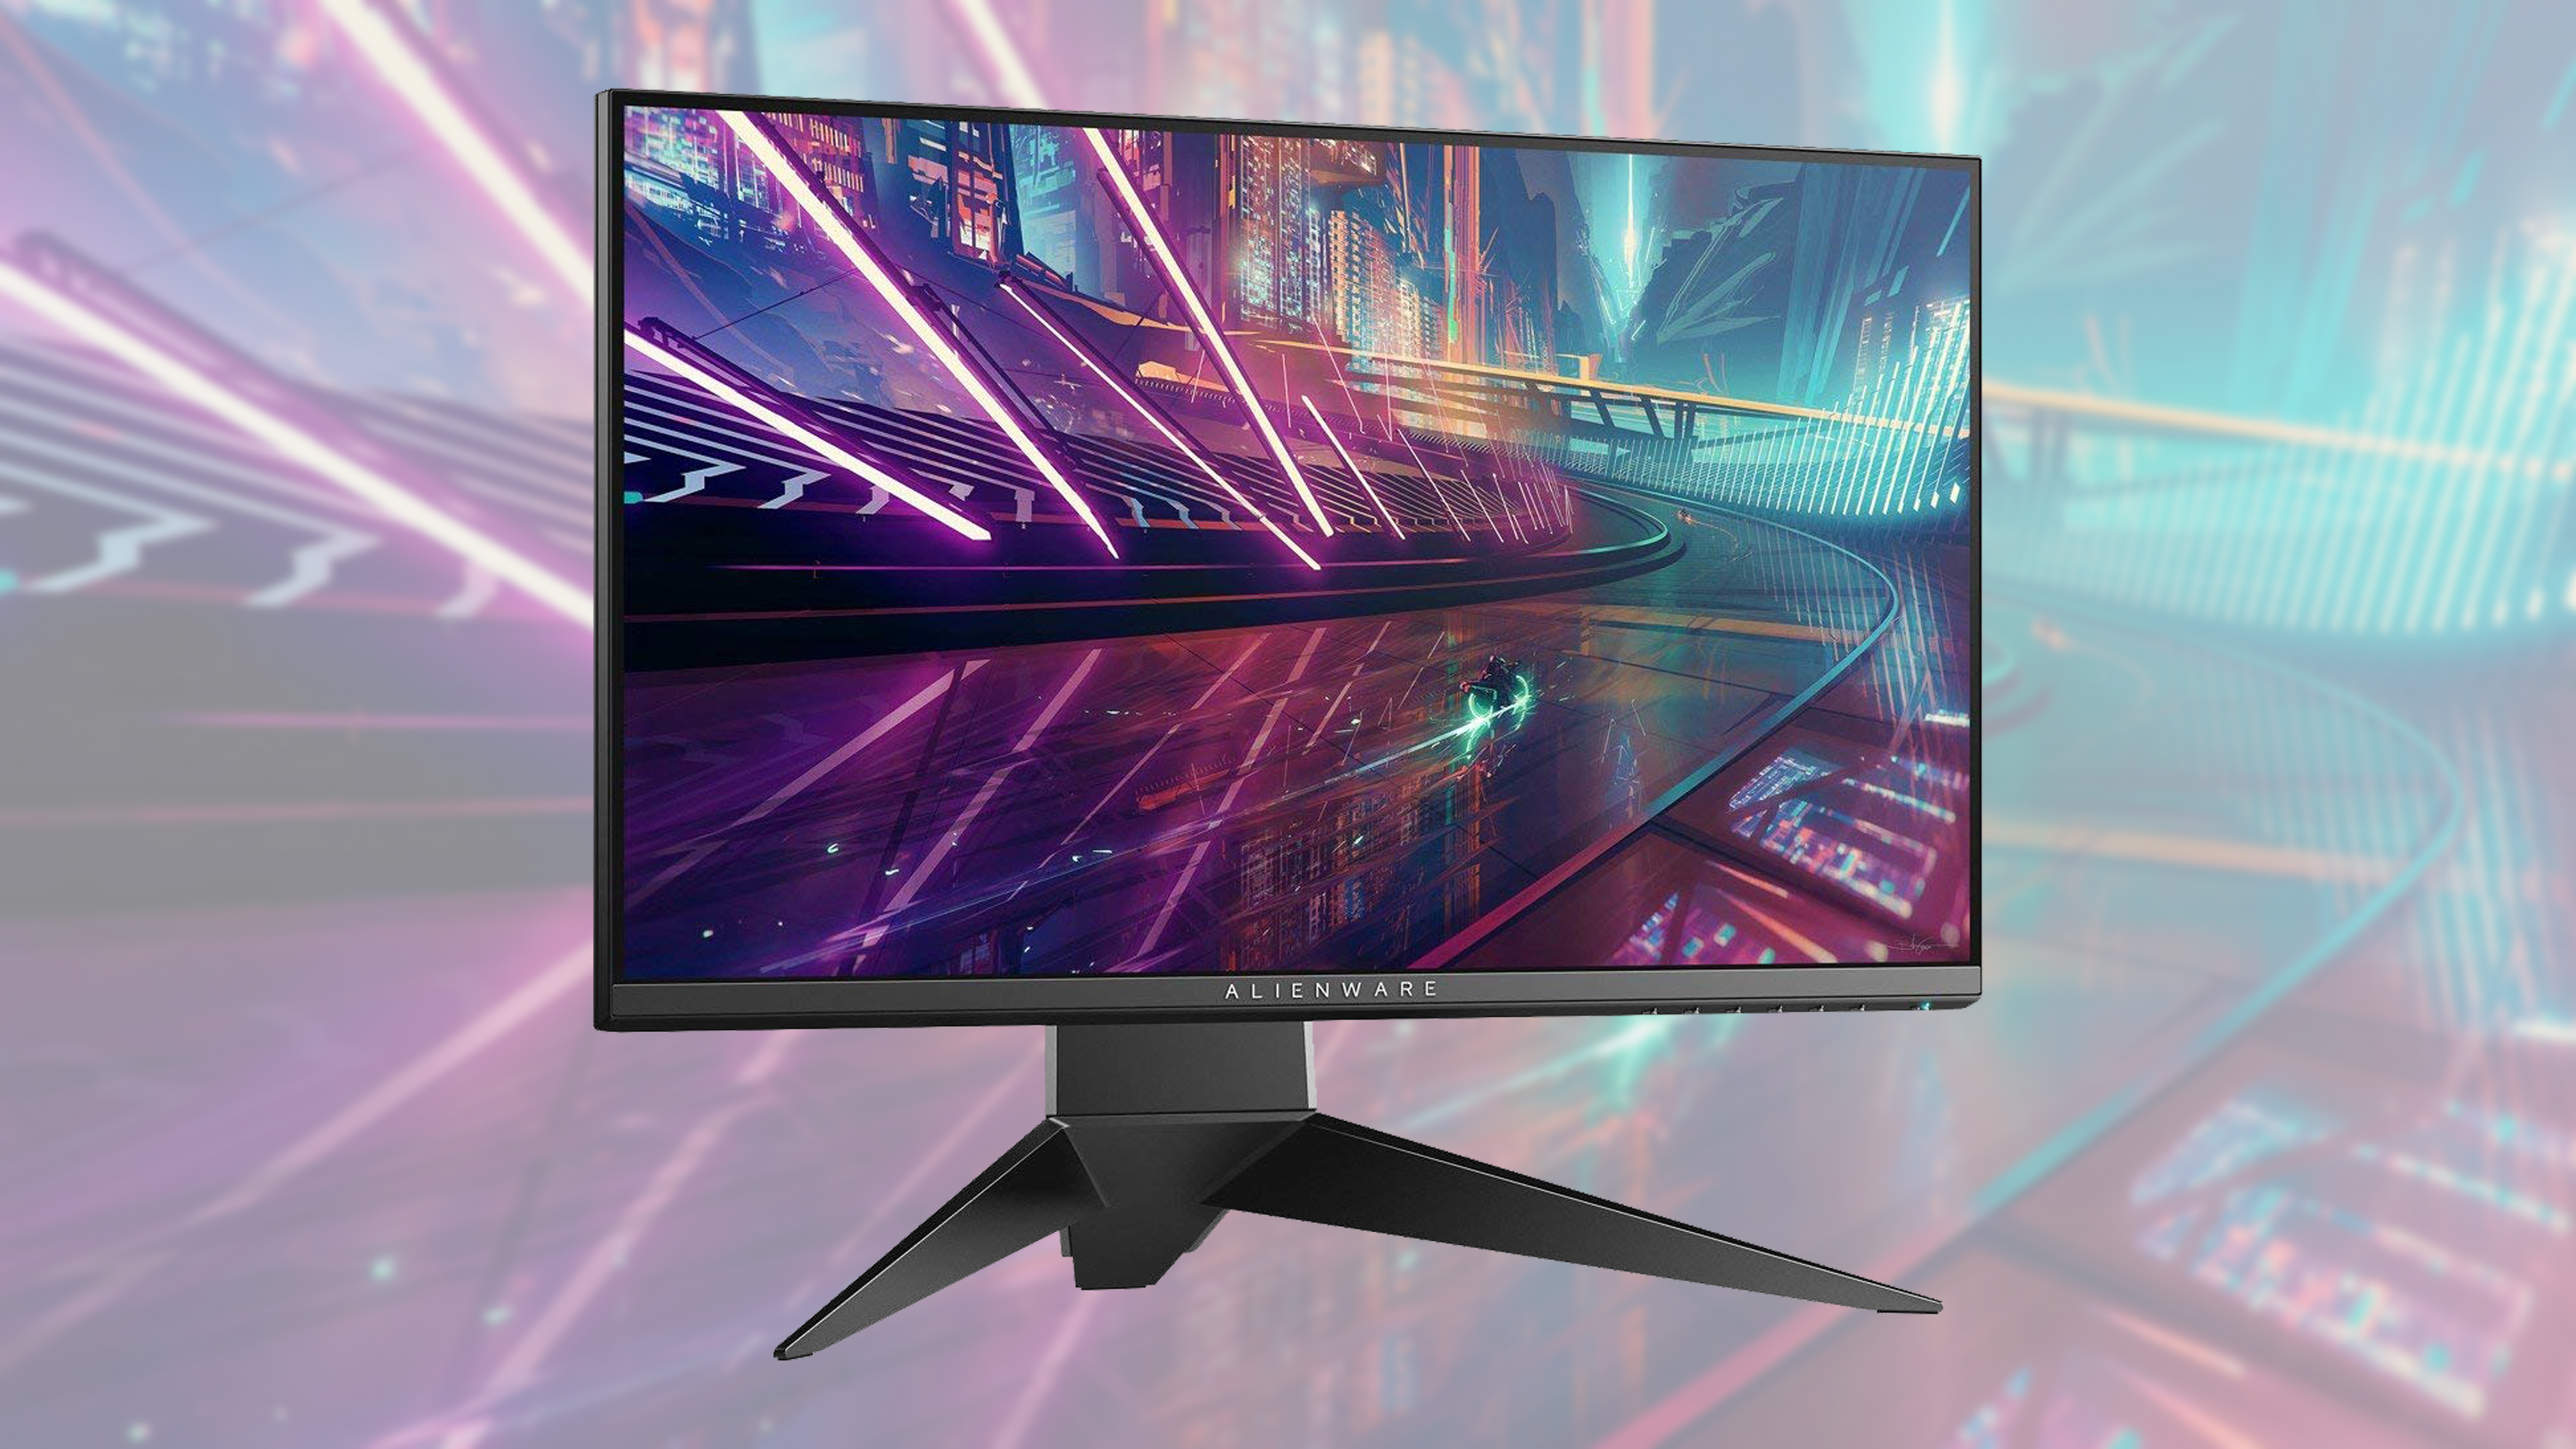 One of our favorite gaming monitors, the 240Hz Alienware AW2518HF